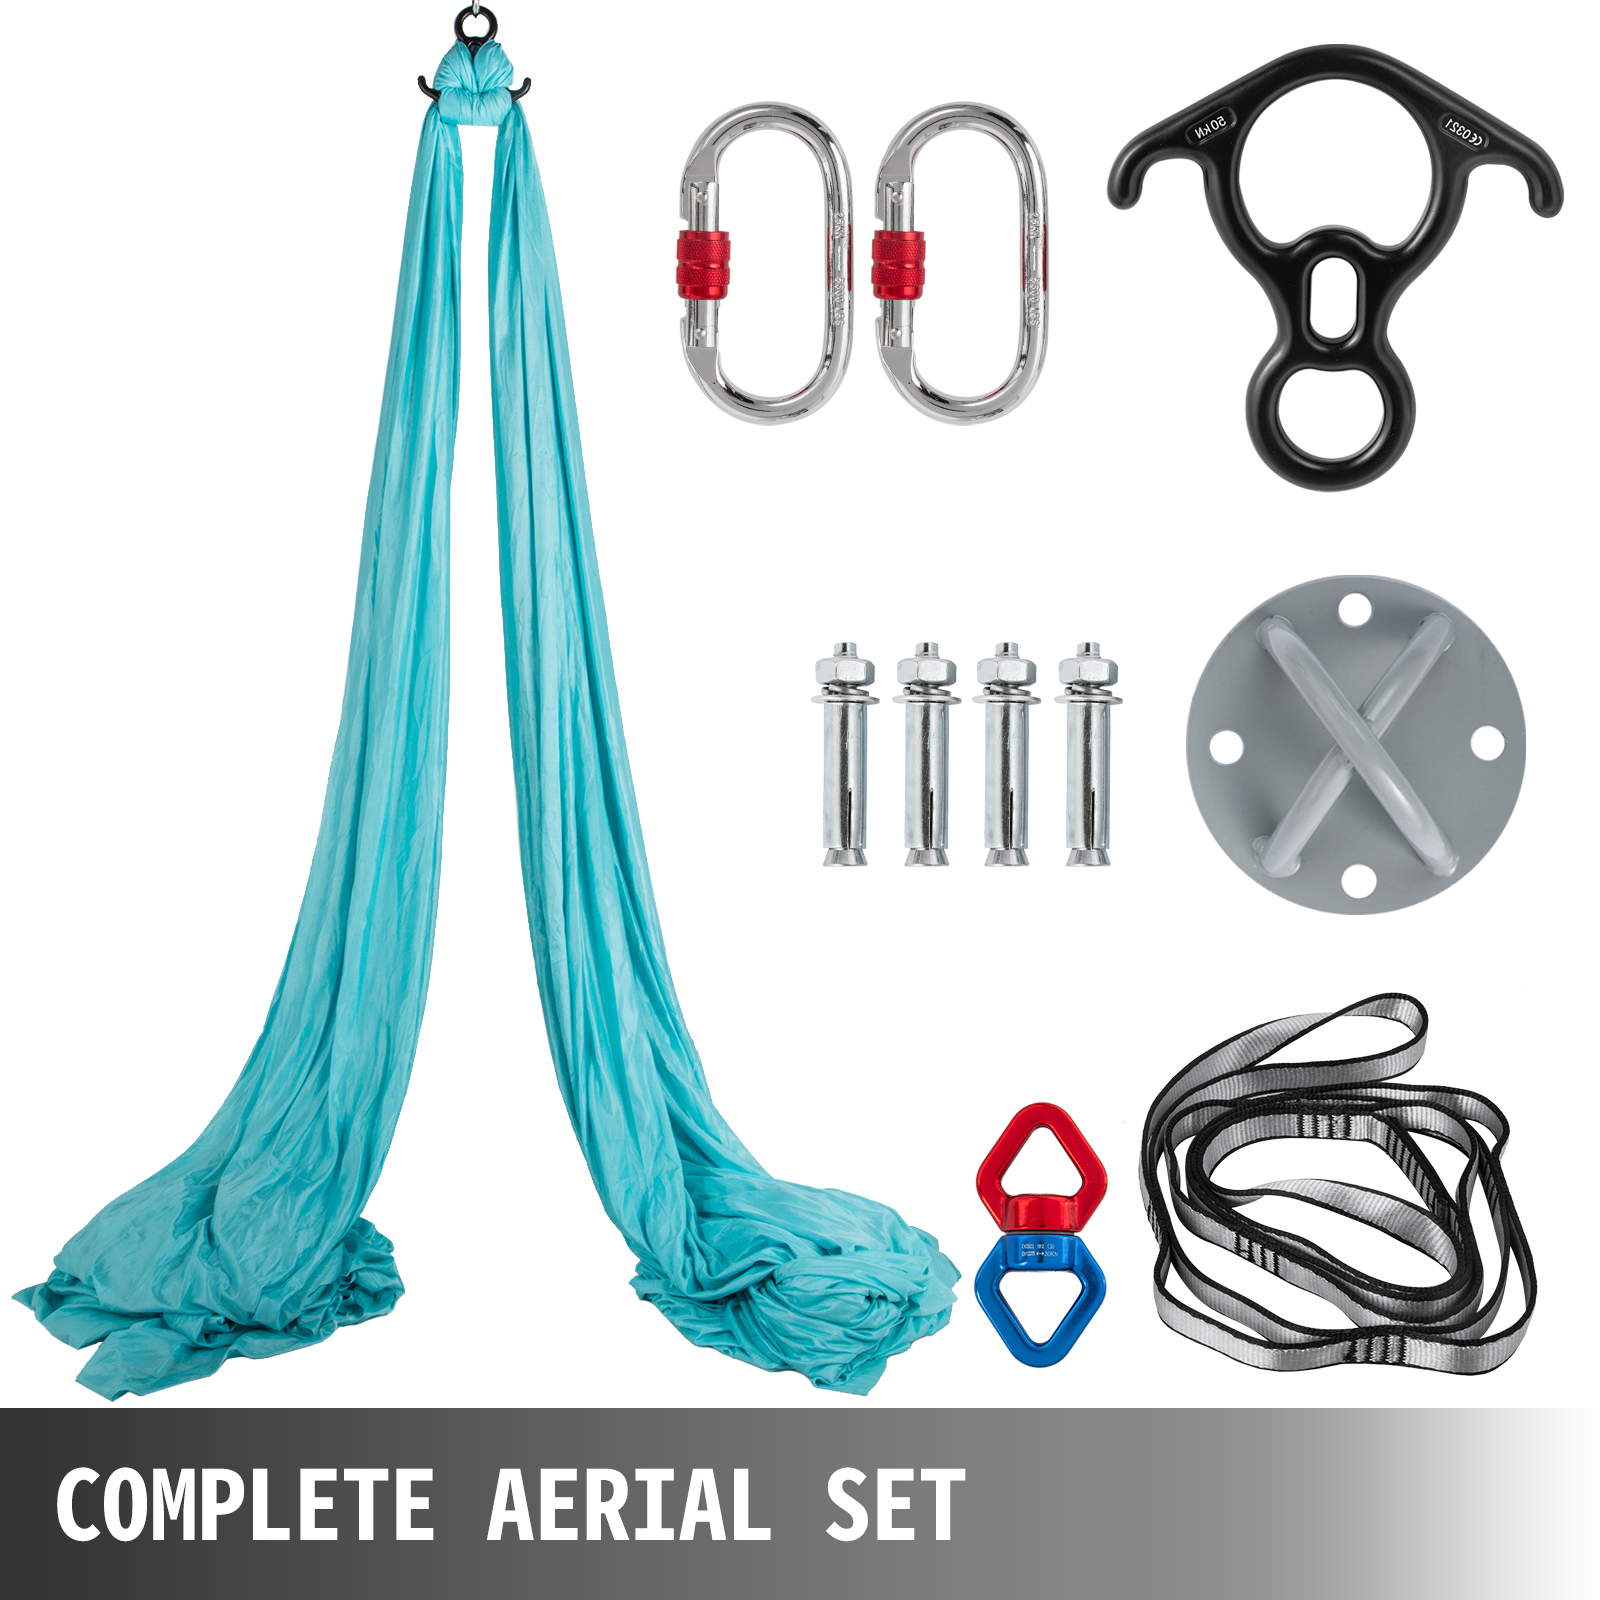 VEVOR Aerial Silk, 11yd 9.2ft Aerial Yoga Swing Set Yoga Hammock Kit -  Antigravity Ceiling Hanging Yoga Sling - Carabiners, Daisy Chain, Inversion  Swing for Home Outdoor Aerial Dance (Pink) 